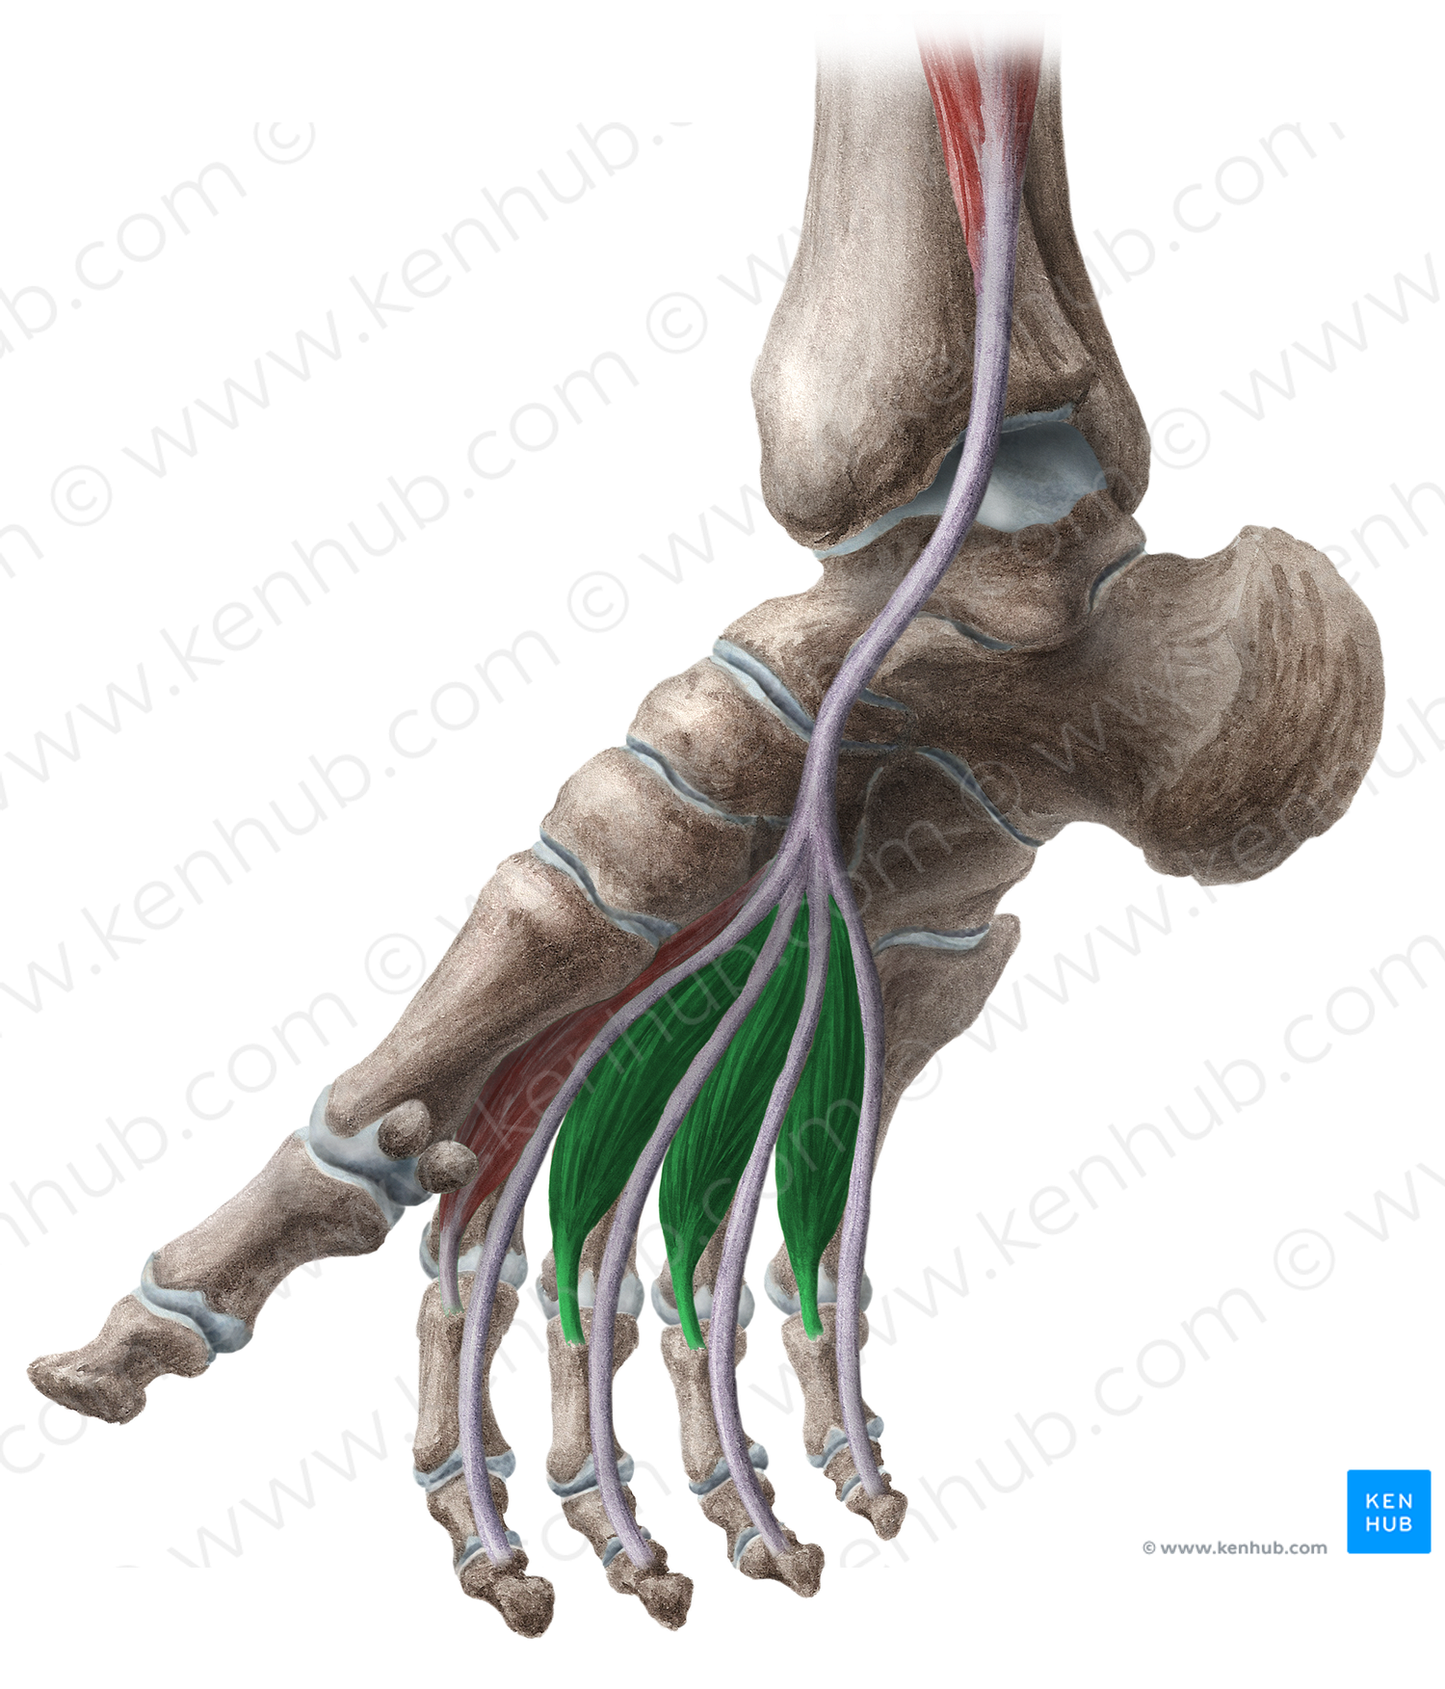 2nd-4th lumbrical muscles of foot (#16188)